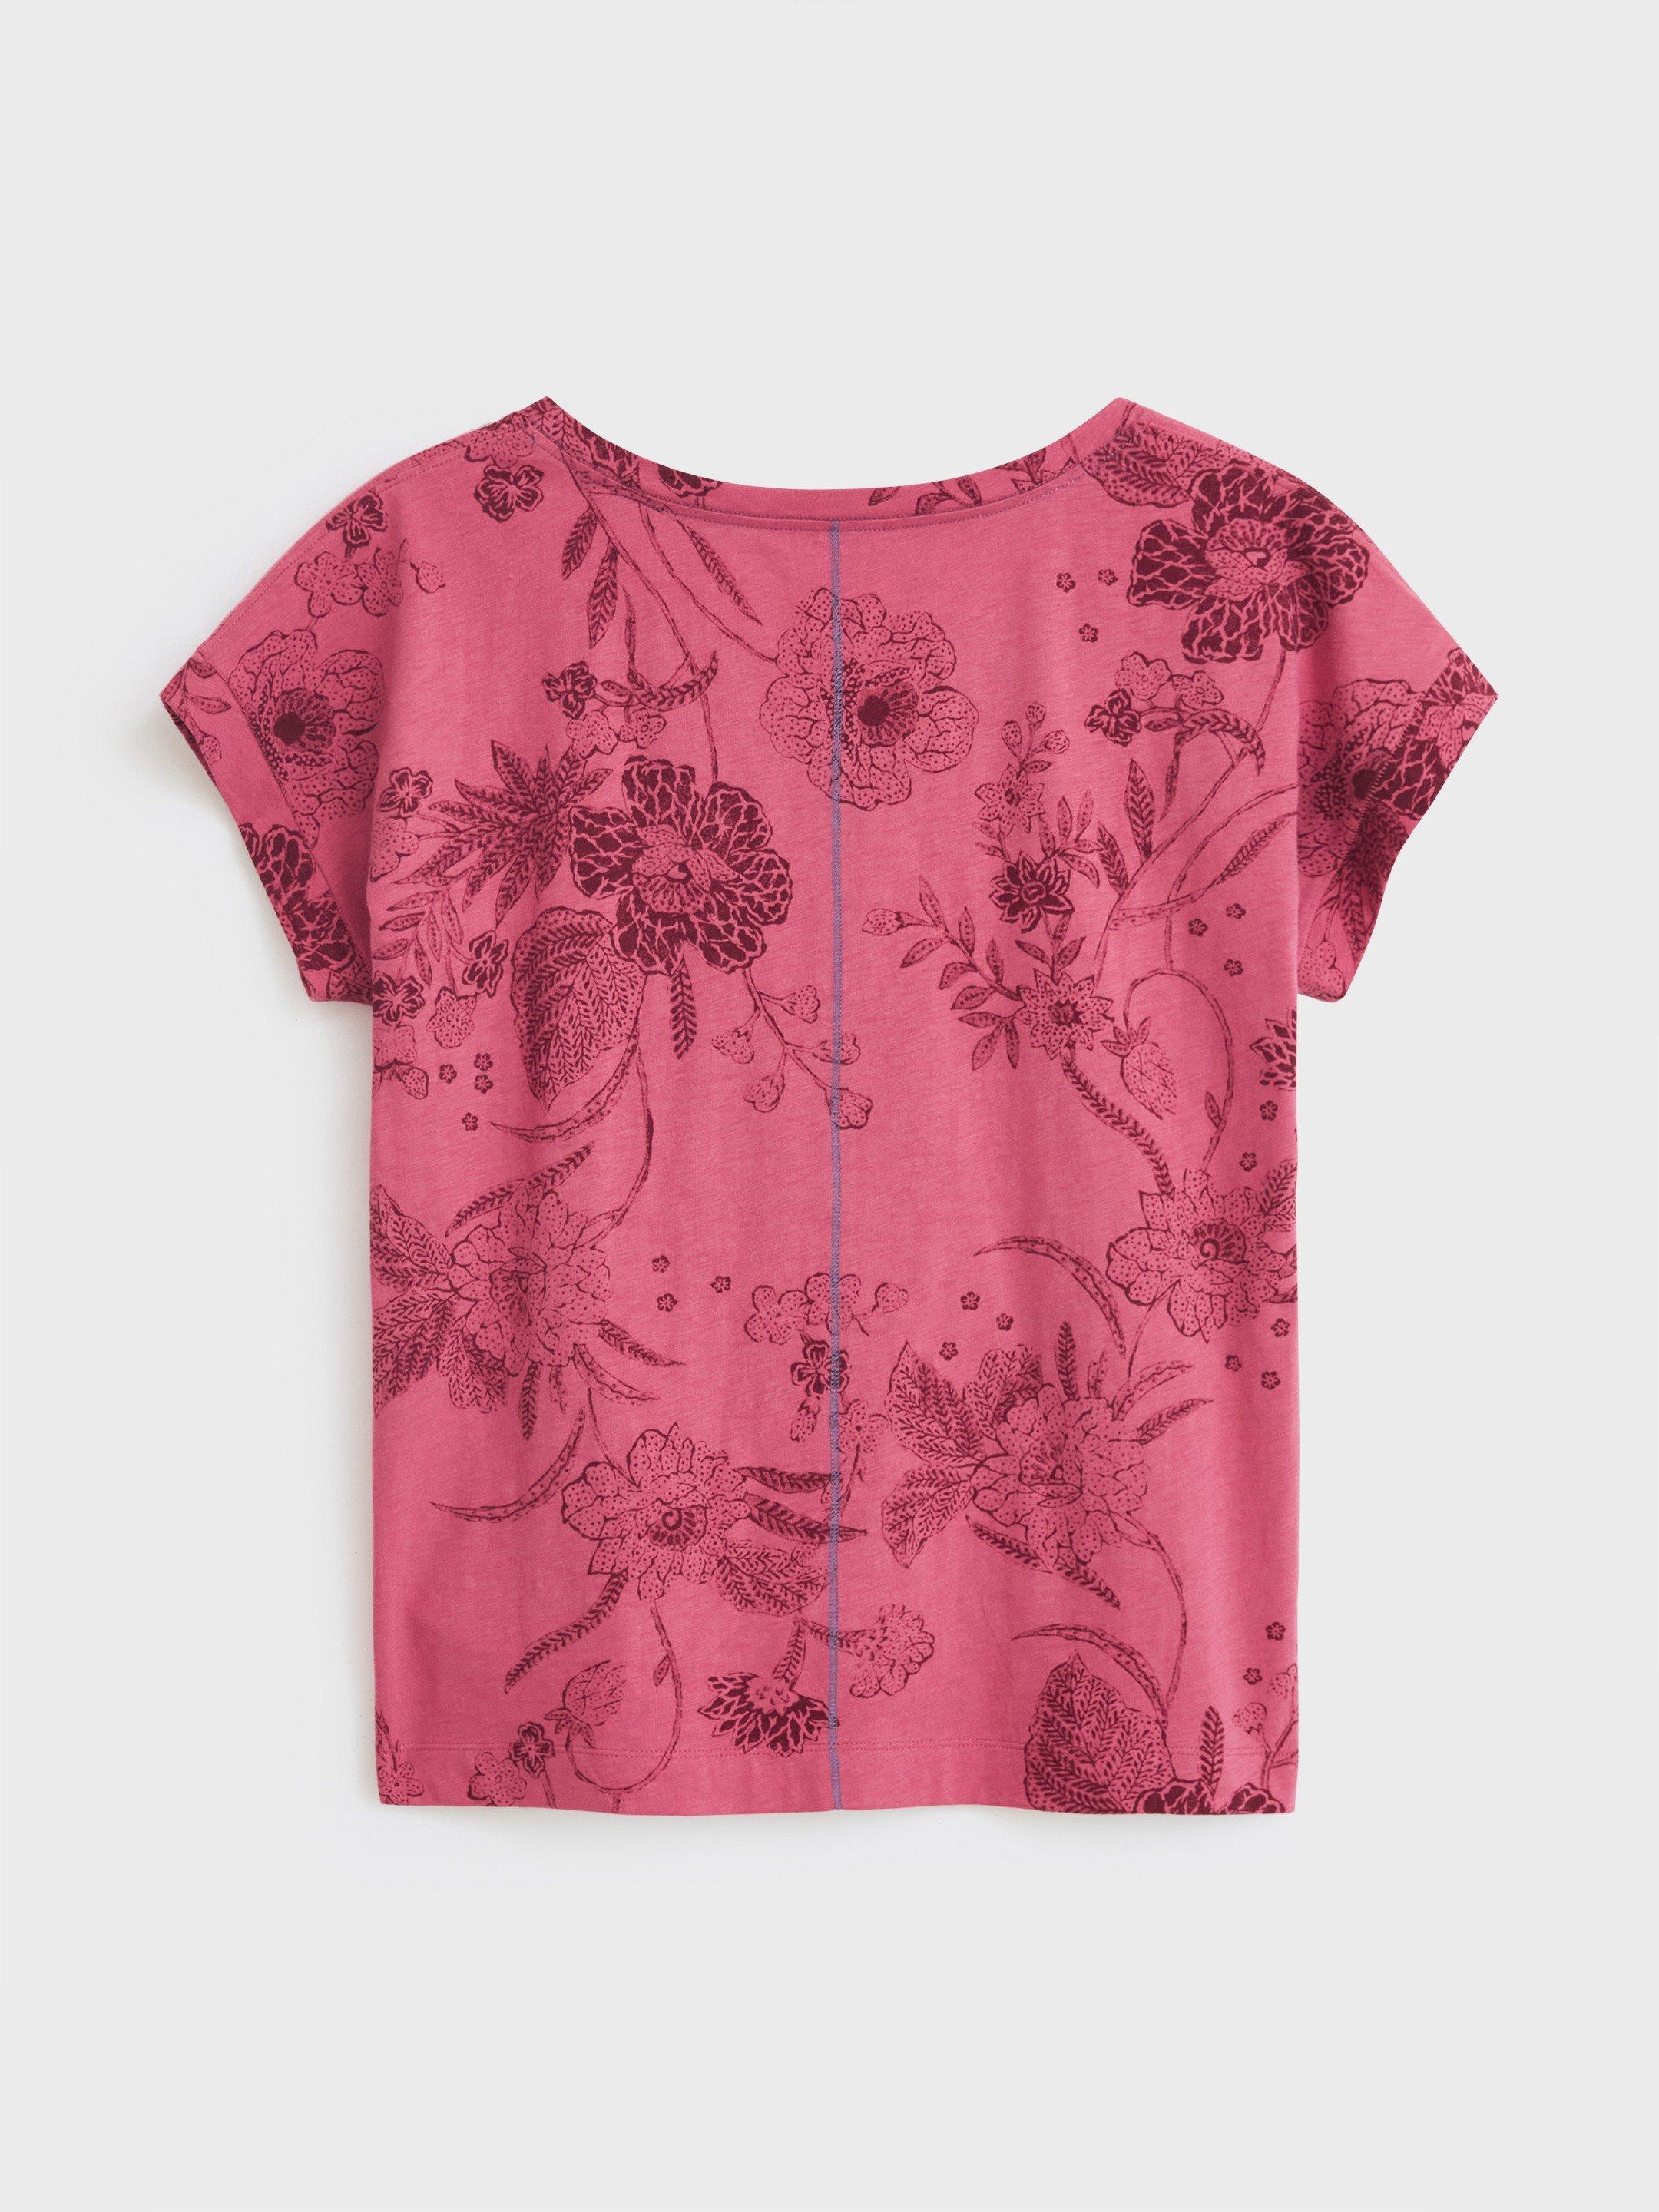 Nelly Notch Printed Tee in PINK PR - FLAT BACK